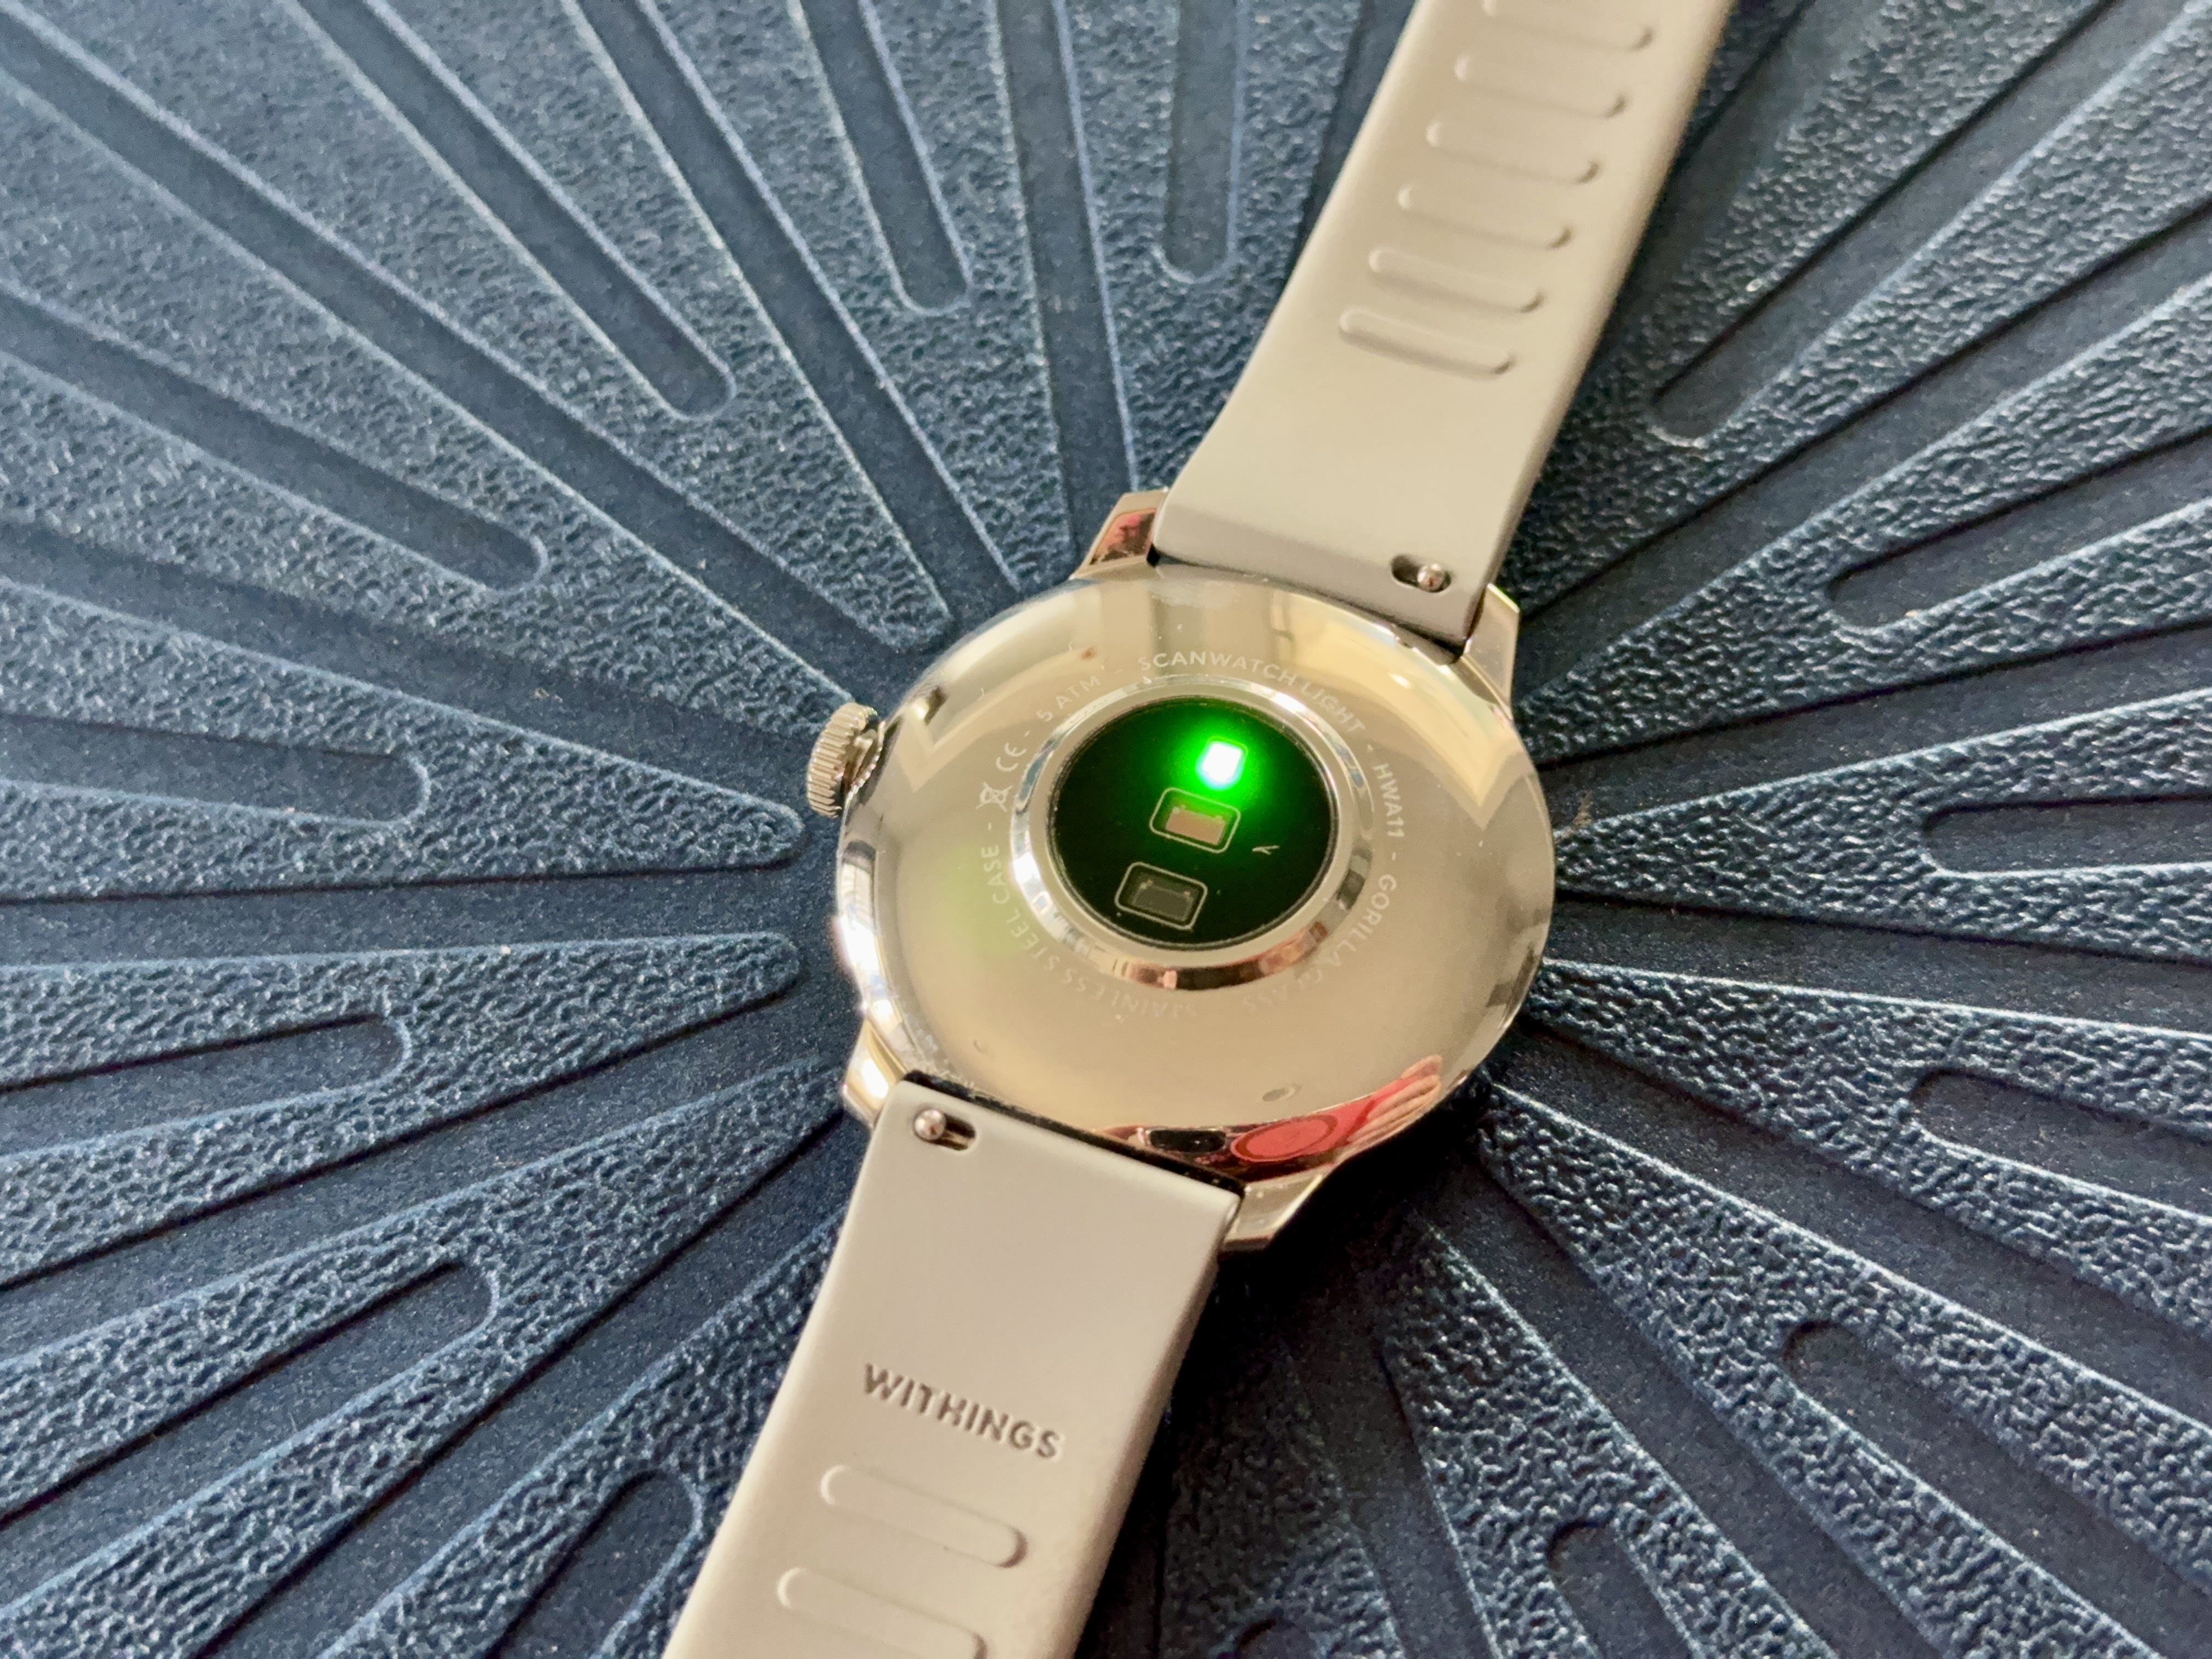 The sensors on the back of the Withings ScanWatch Light.